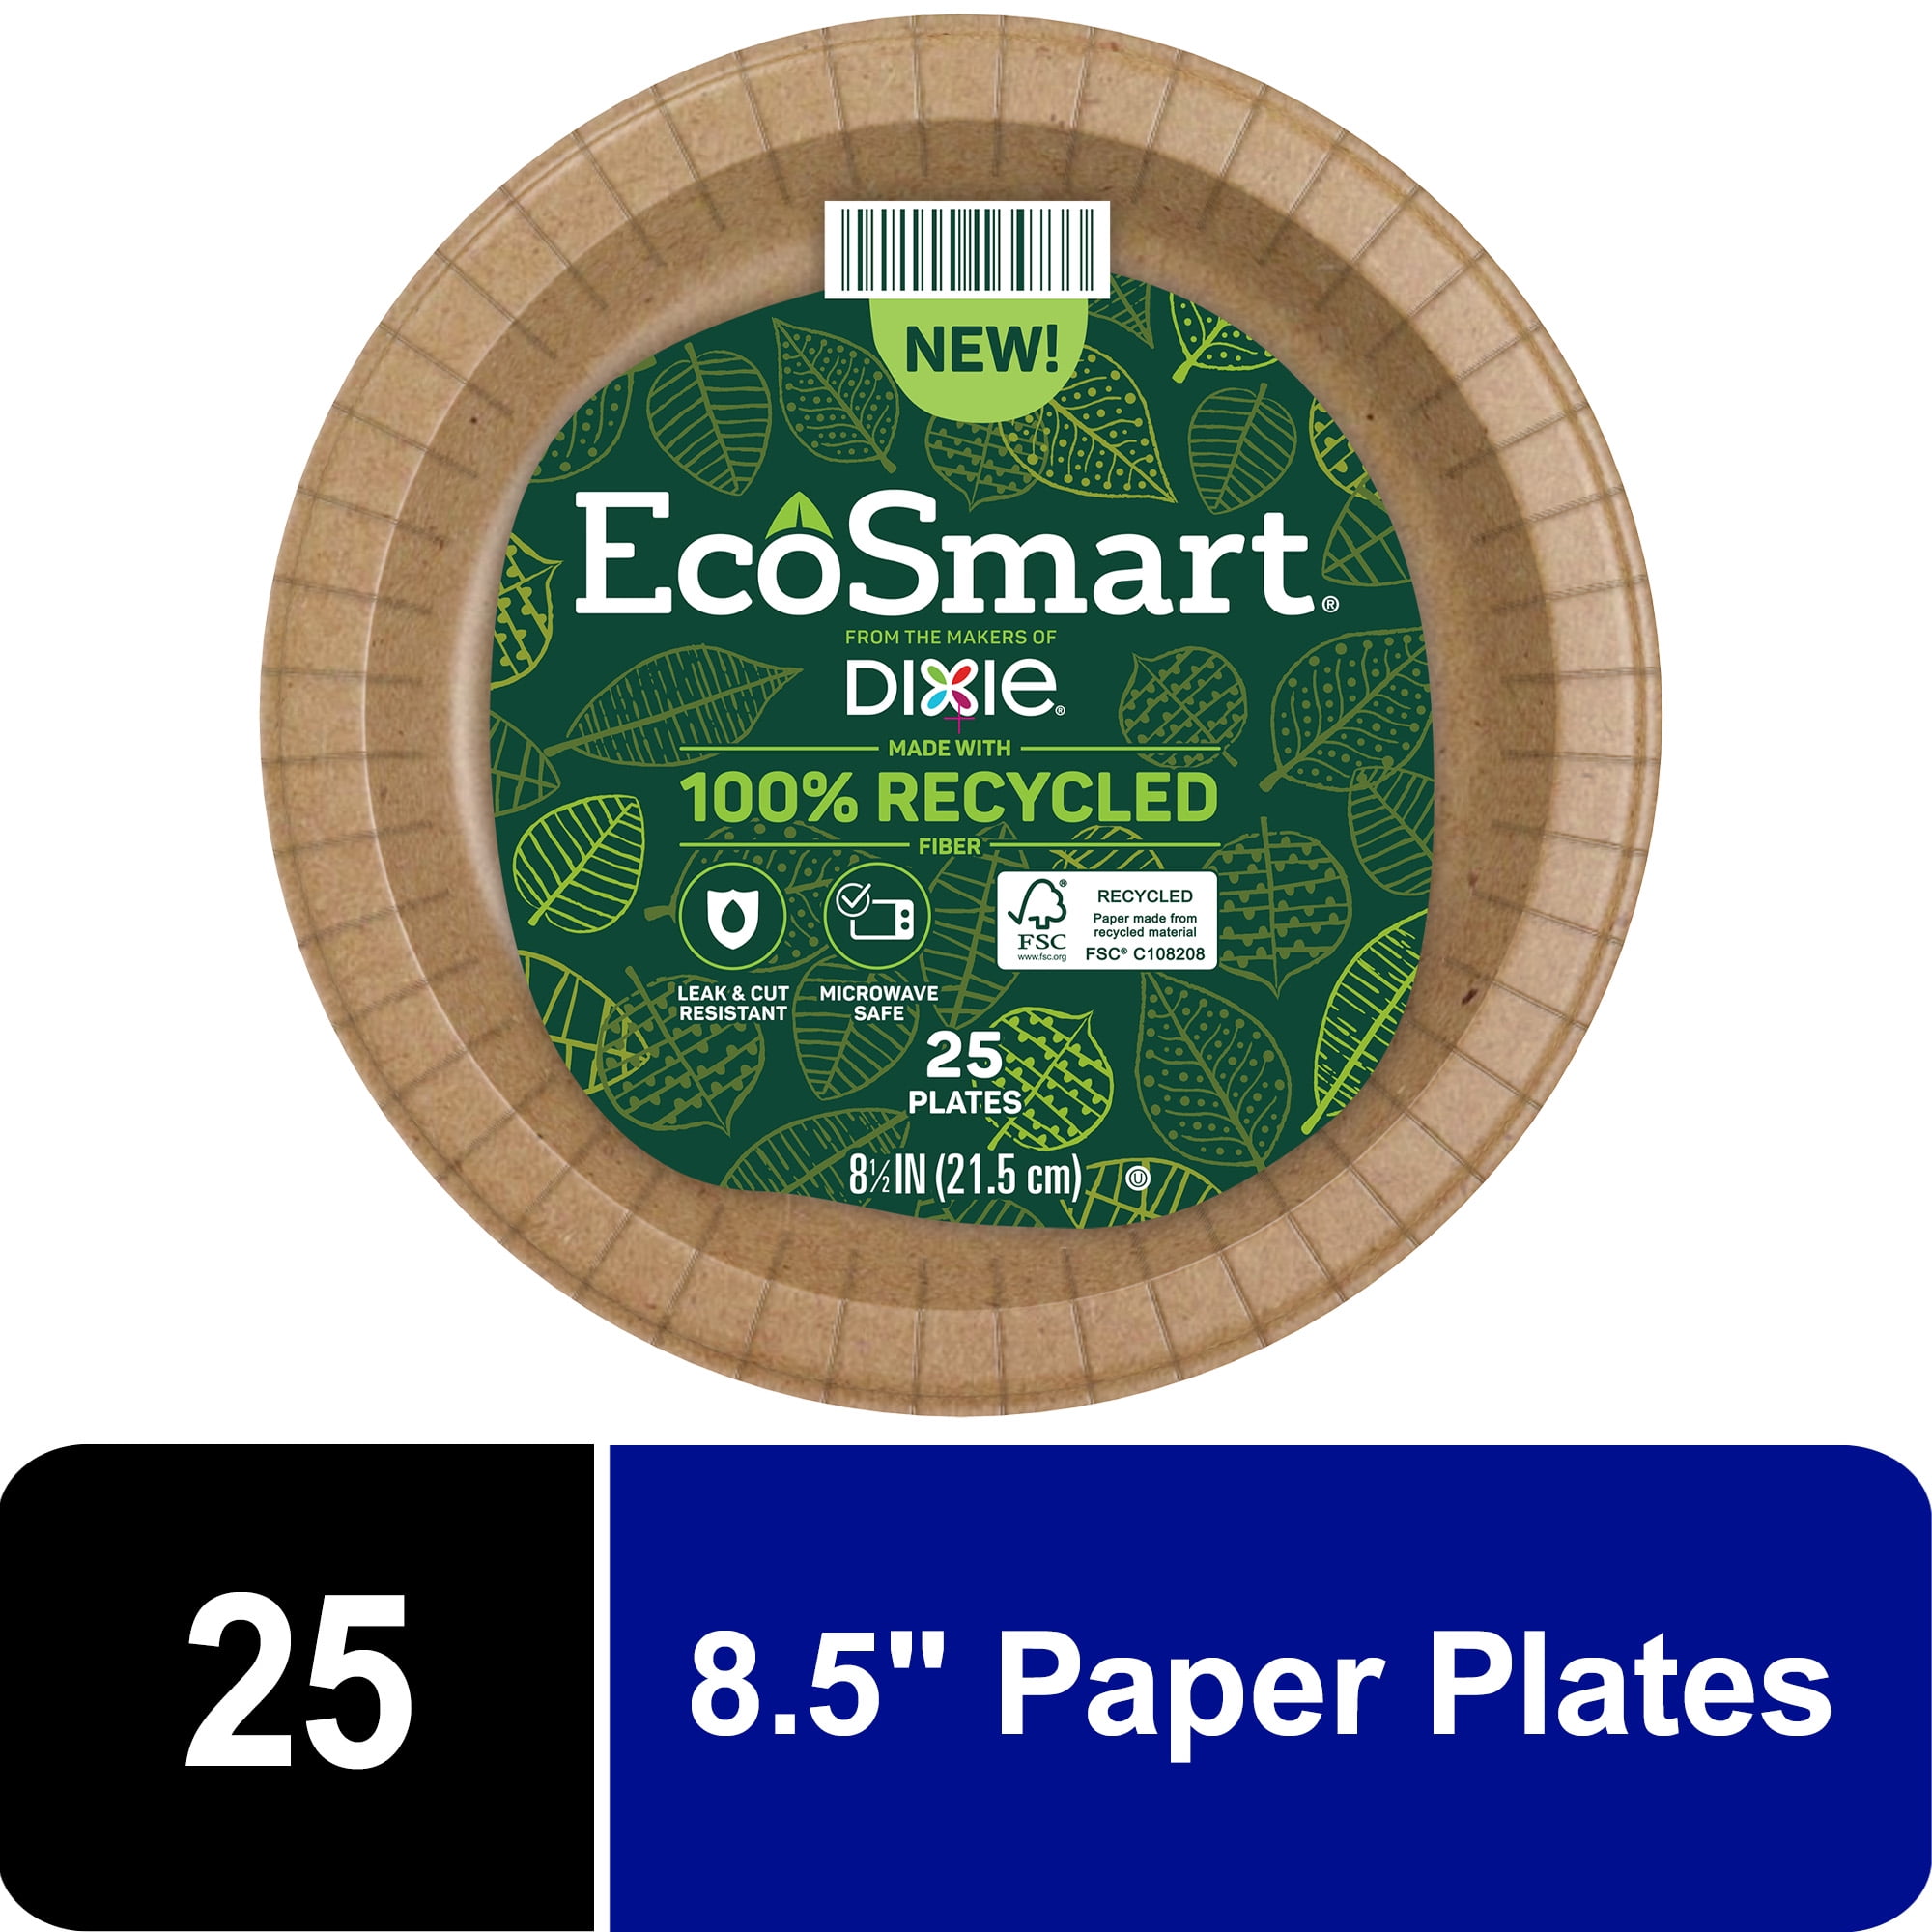  Disposable Paper Plates 9 Inch with 3 Compartment [50  Pack]-100% Compostable Paper Plates Heavy Duty-Divided Plates Made of  Sugarcane Fibers Biodegradable for Parties, Picnics, Dinners, BBQs (White)  : Health & Household